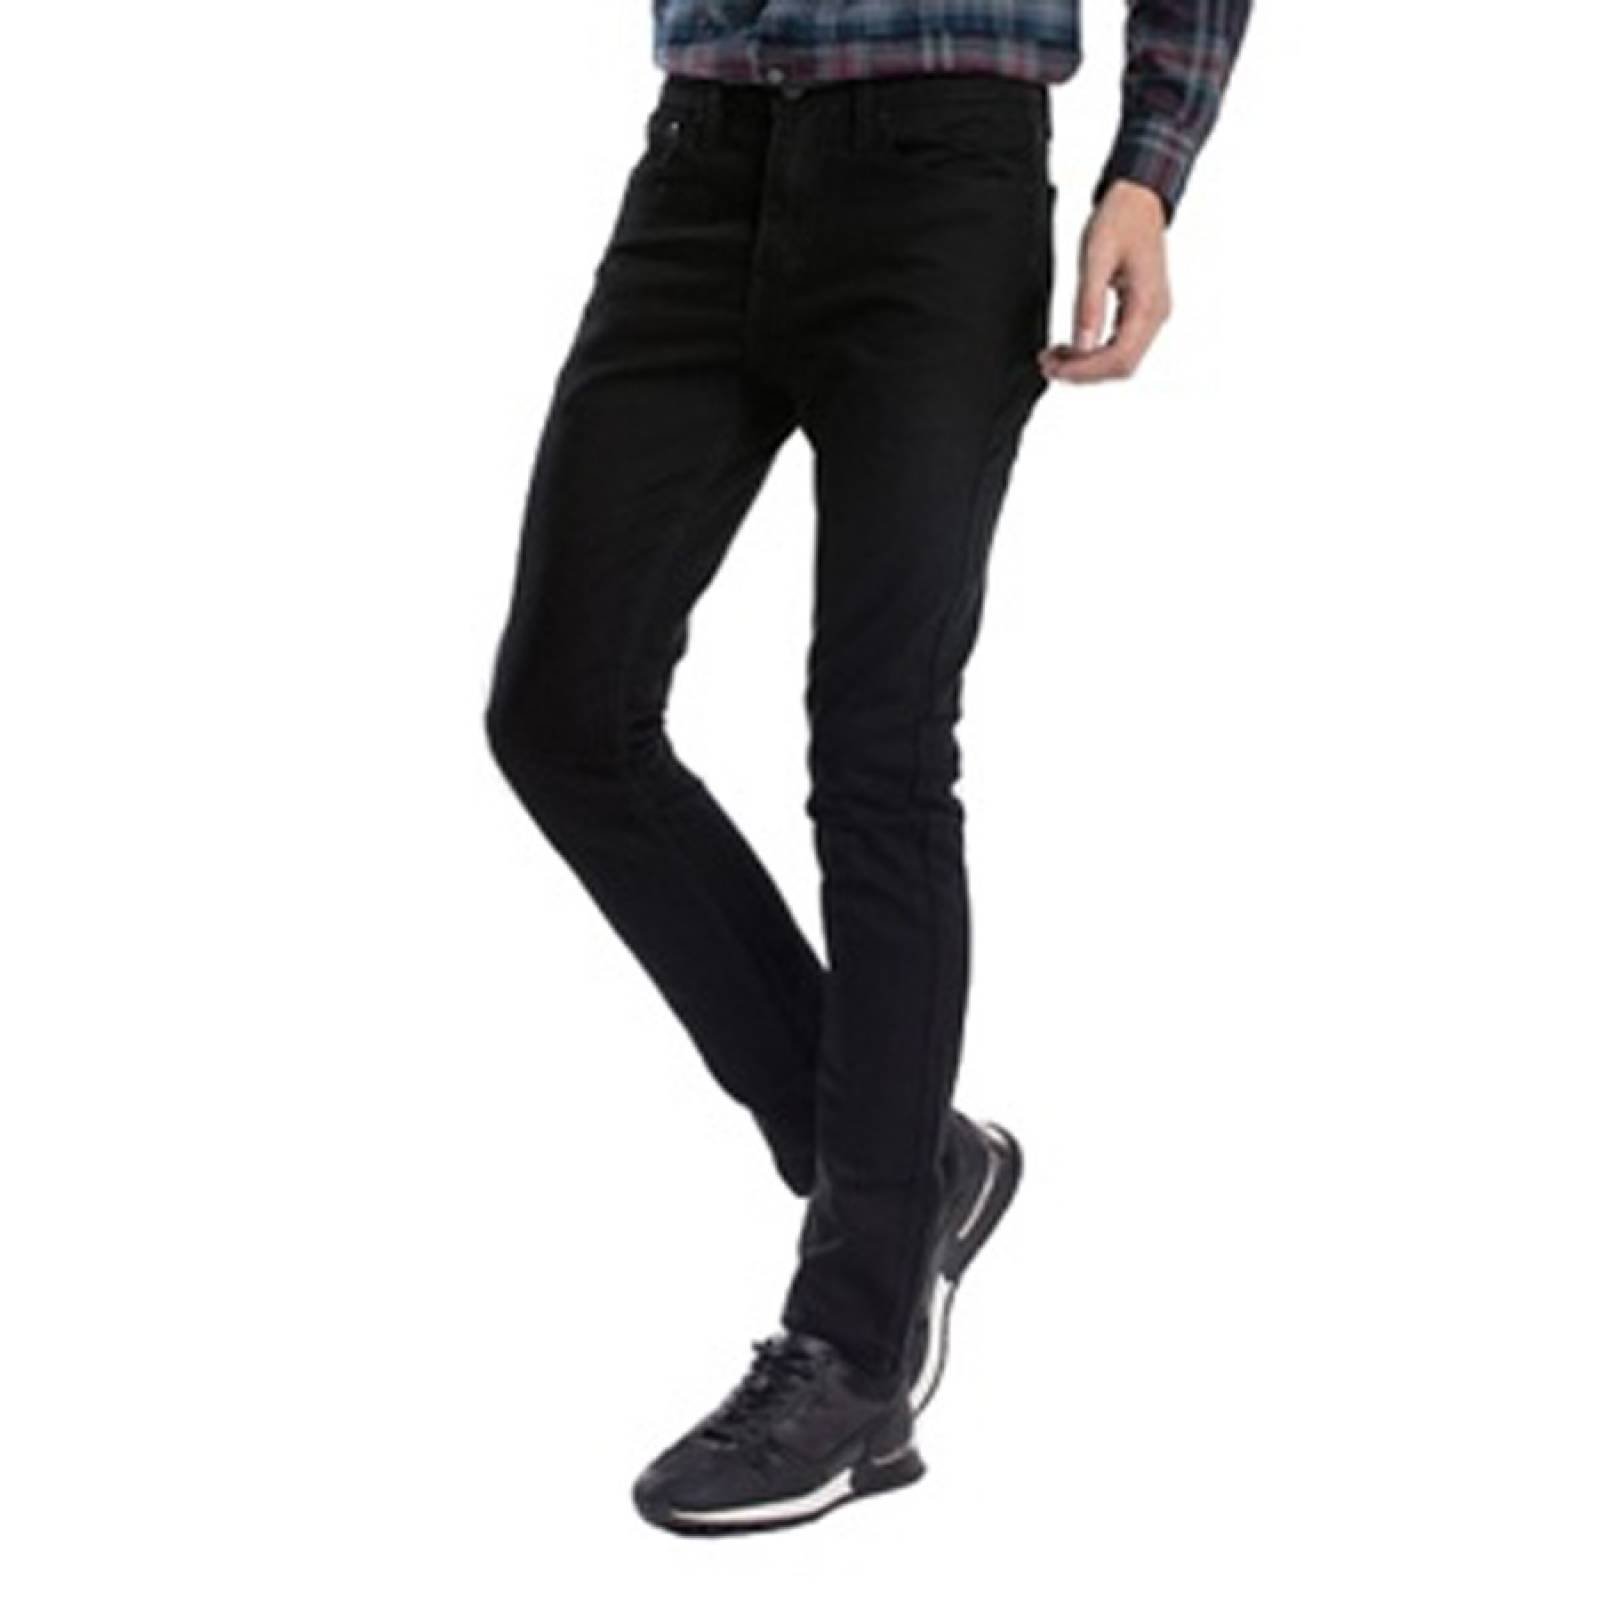 Jeans Levis 510 Skinny Fit 62209-0016